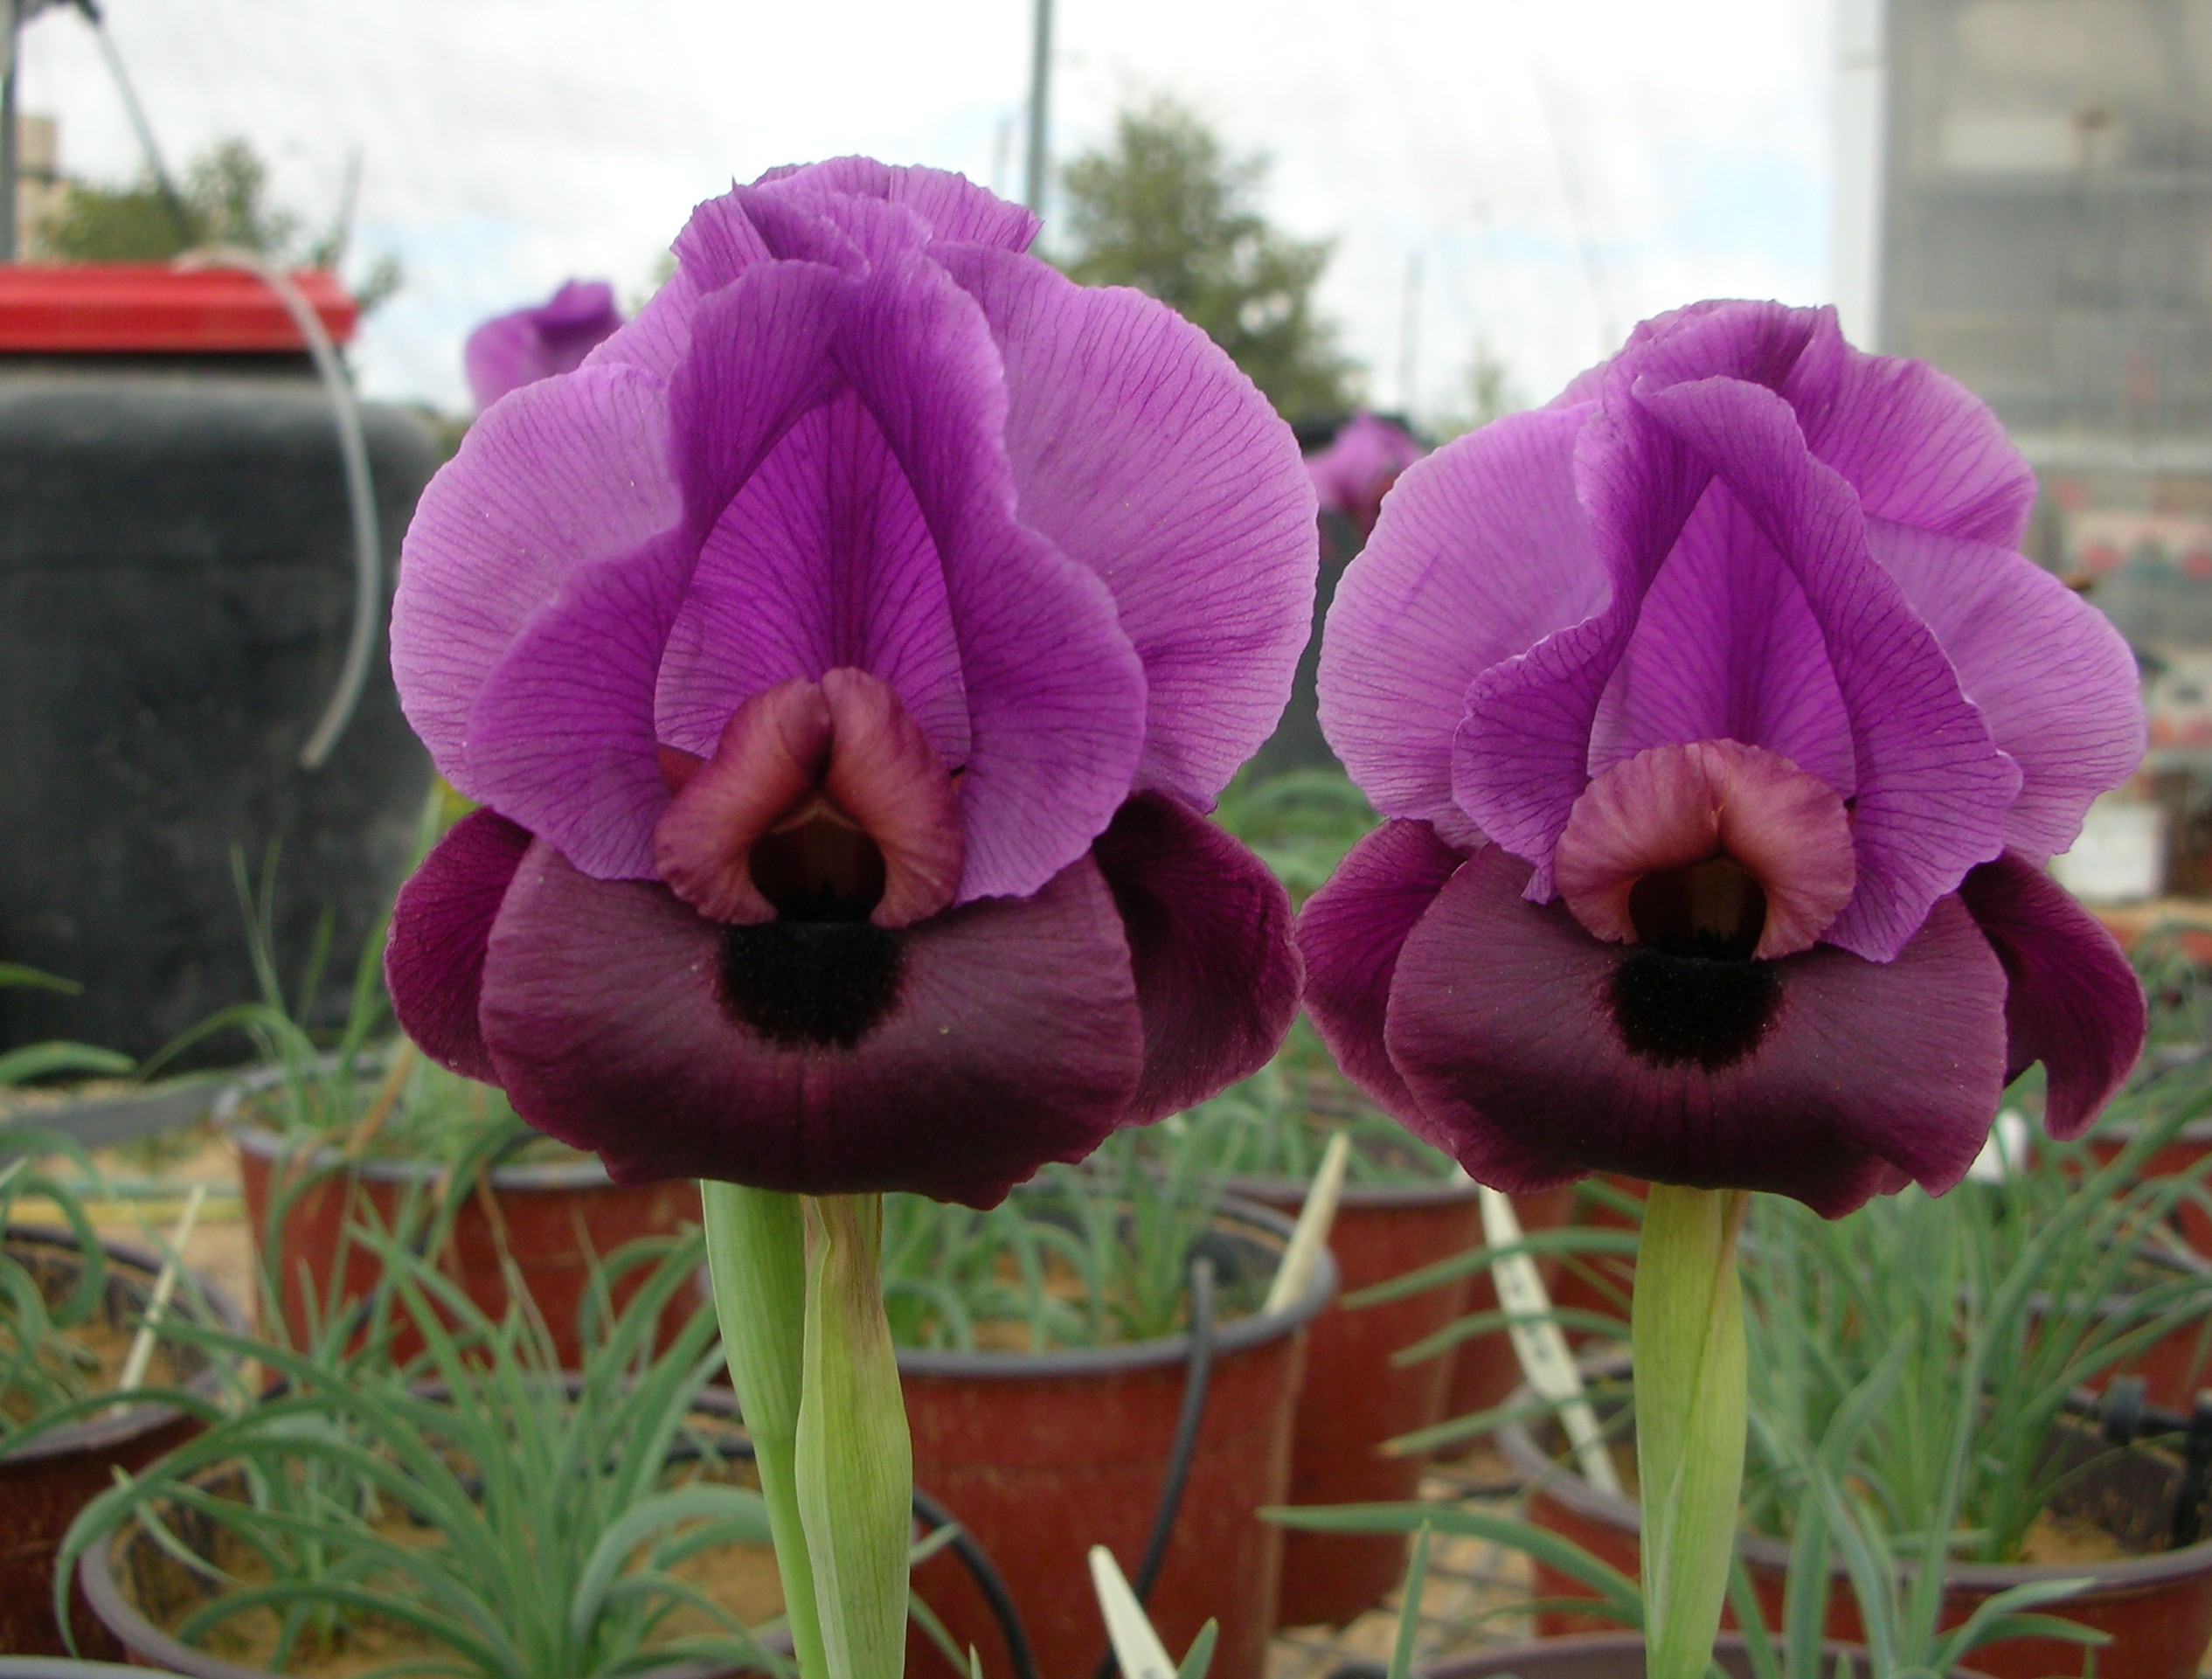 <i>Iris mariae</i>, a rare iris species found in Israel. The image was taken in an ecological greenhouse experiment at the Ben-Gurion University in 2008.